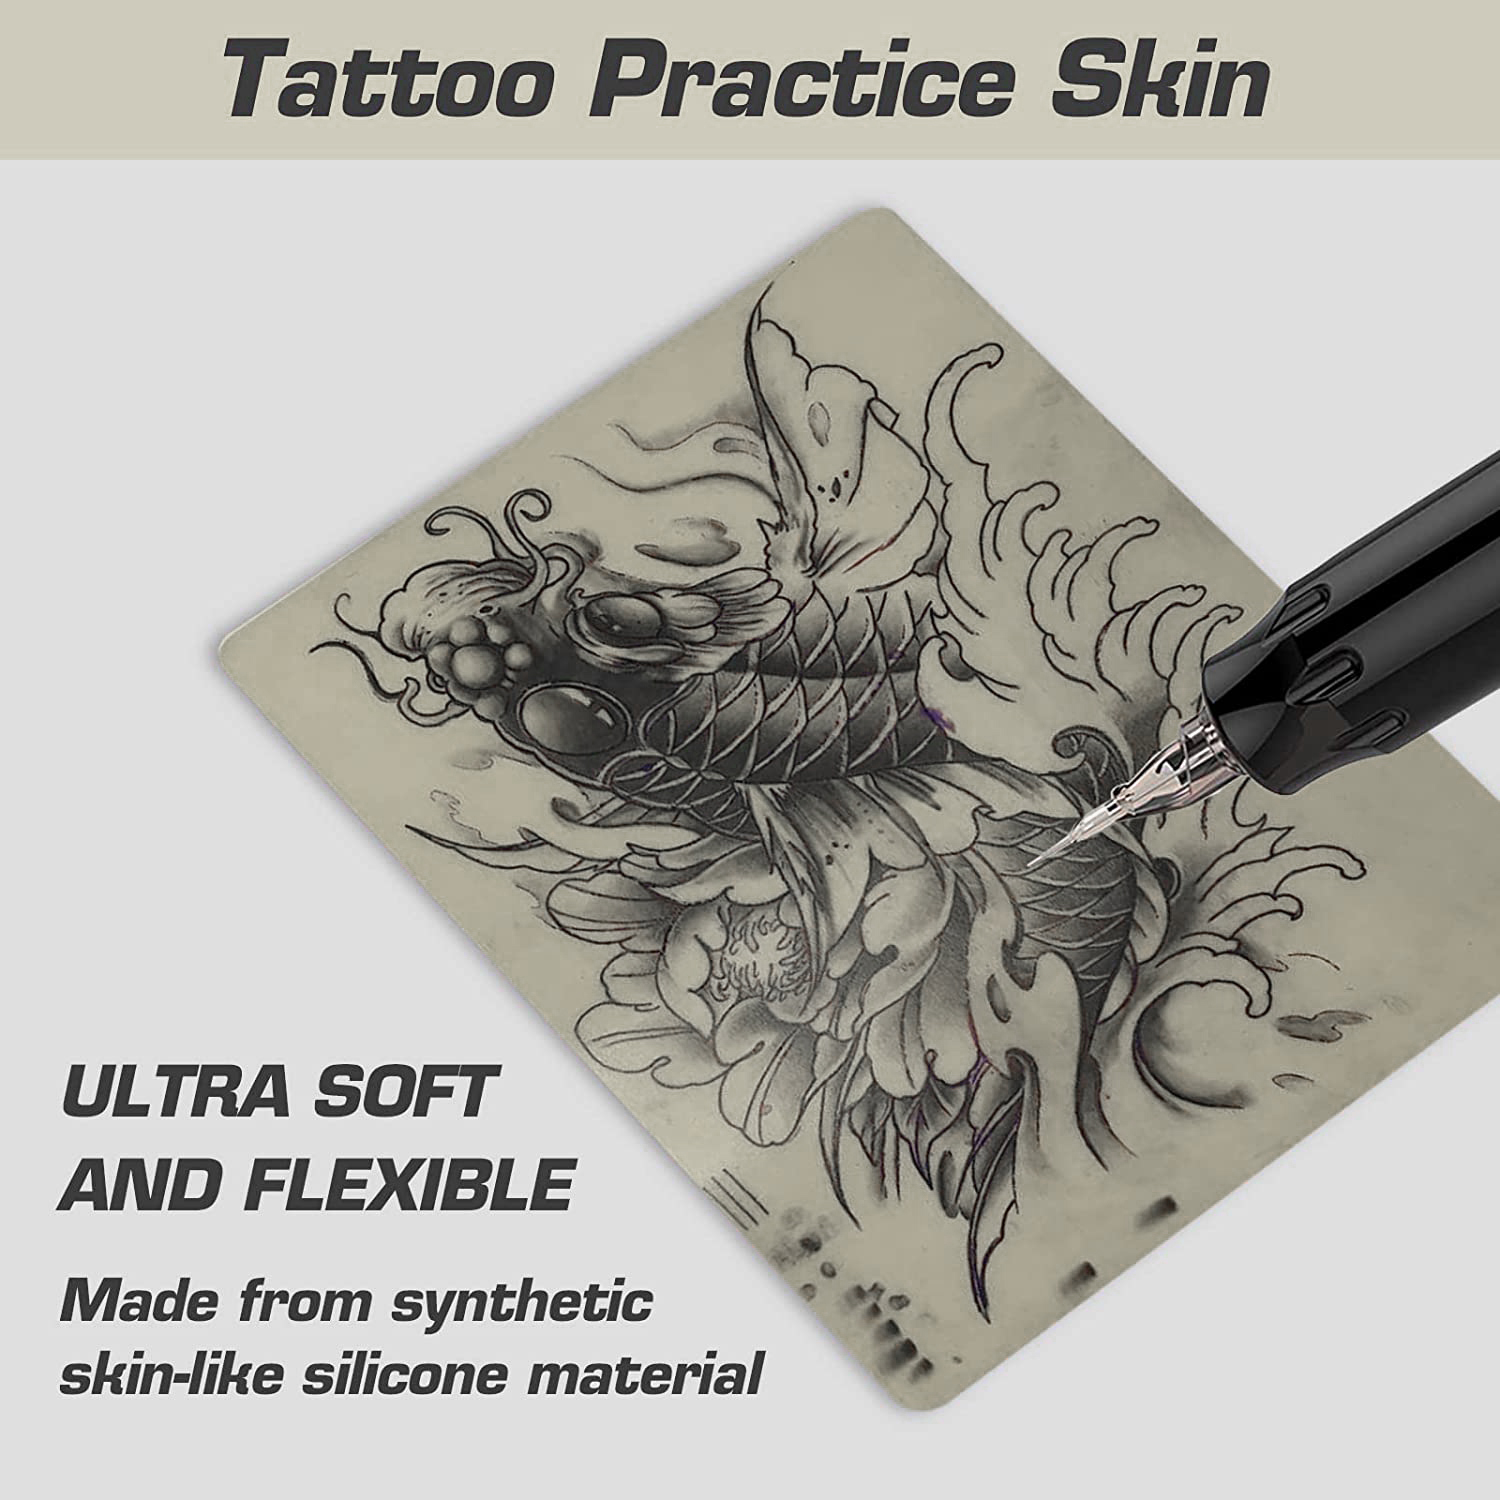 Tattoo Practice Skin Review